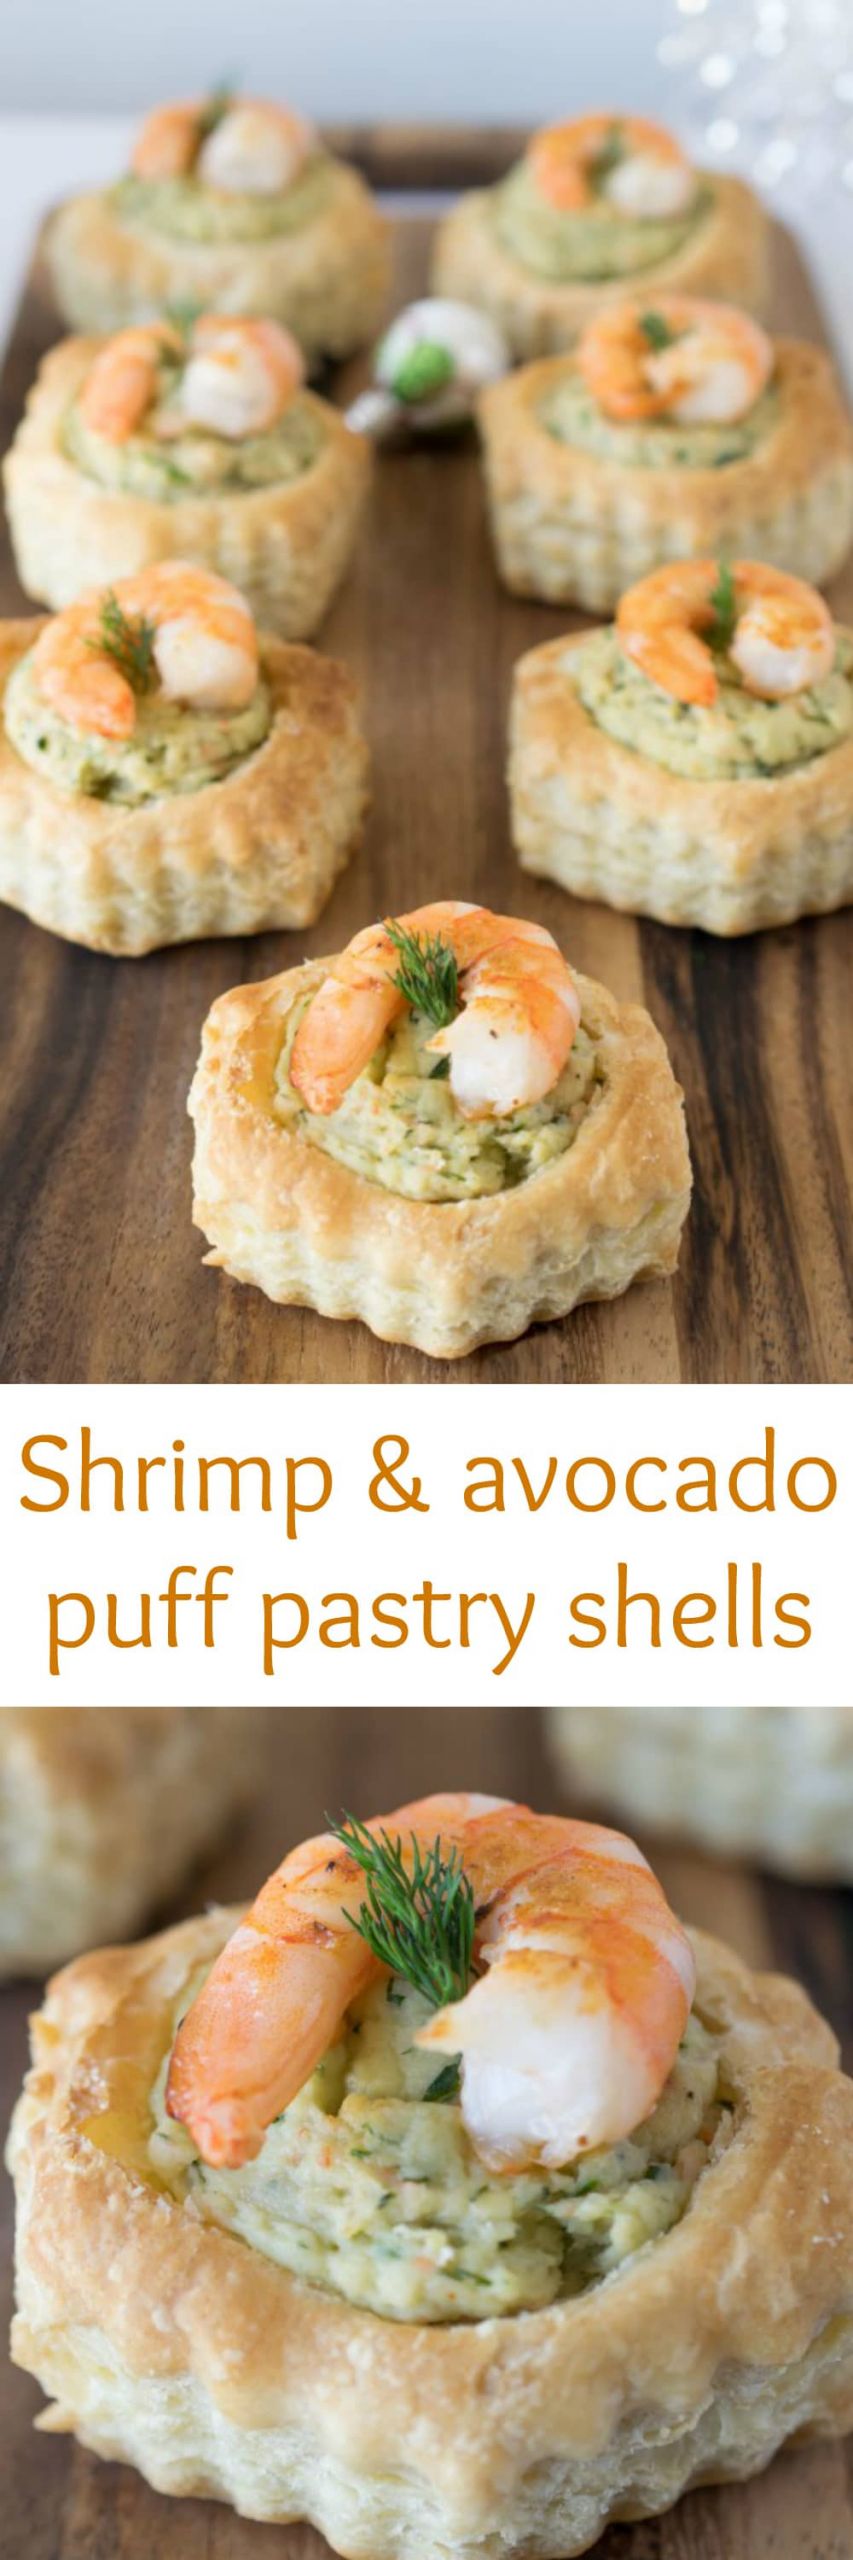 Puff Pastry Shells Recipes Appetizers
 Shrimp & Avocado Puff Pastry Shells Recipe